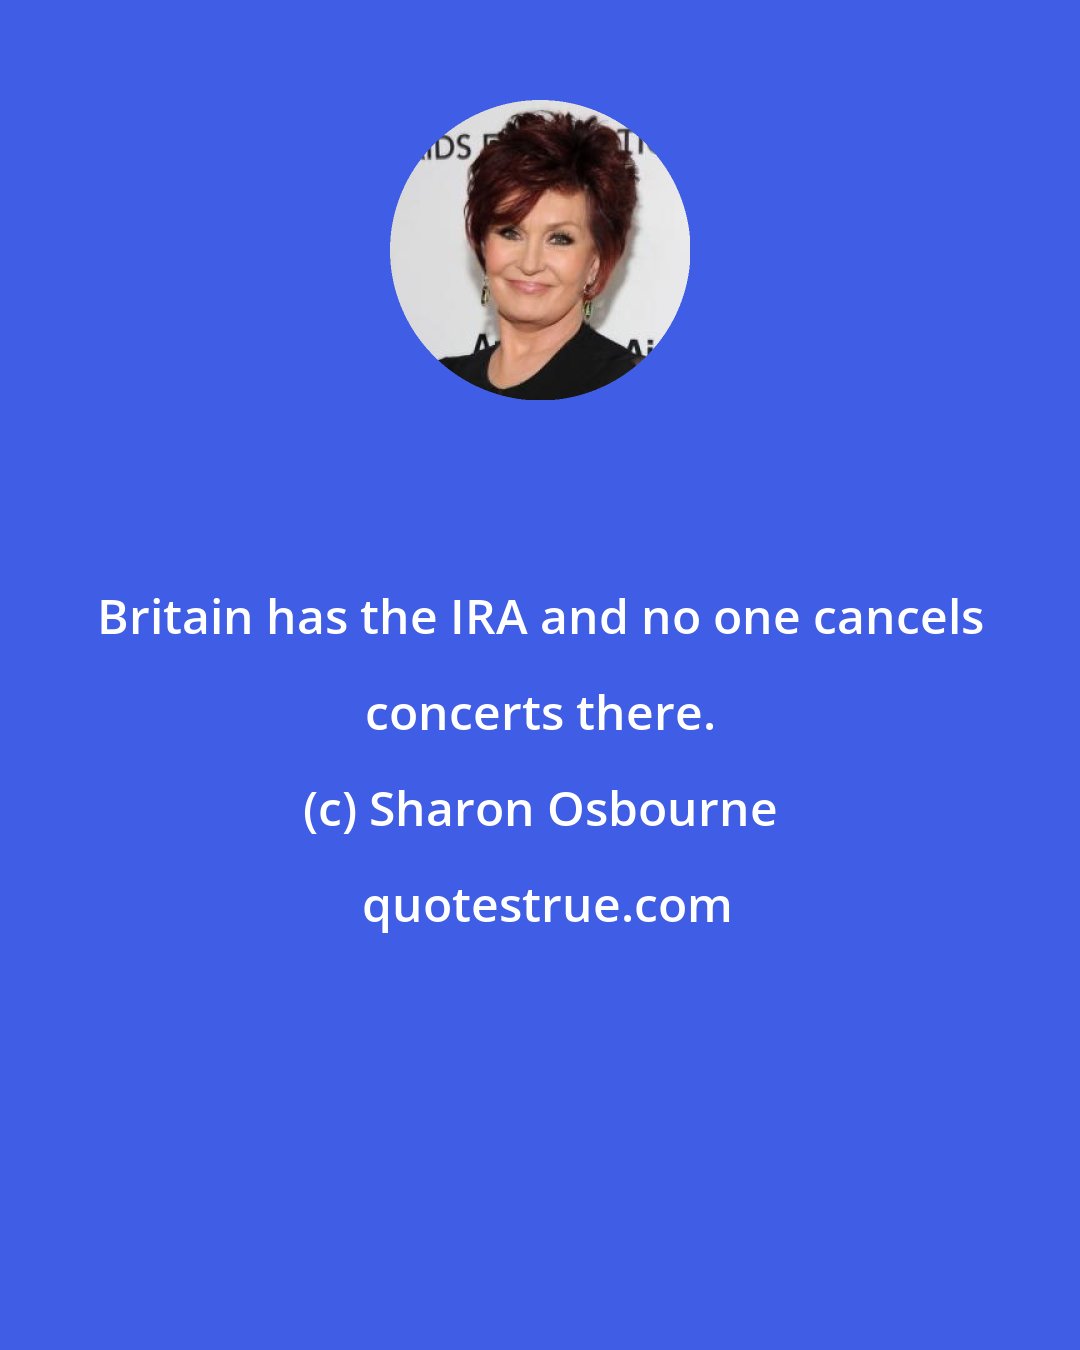 Sharon Osbourne: Britain has the IRA and no one cancels concerts there.